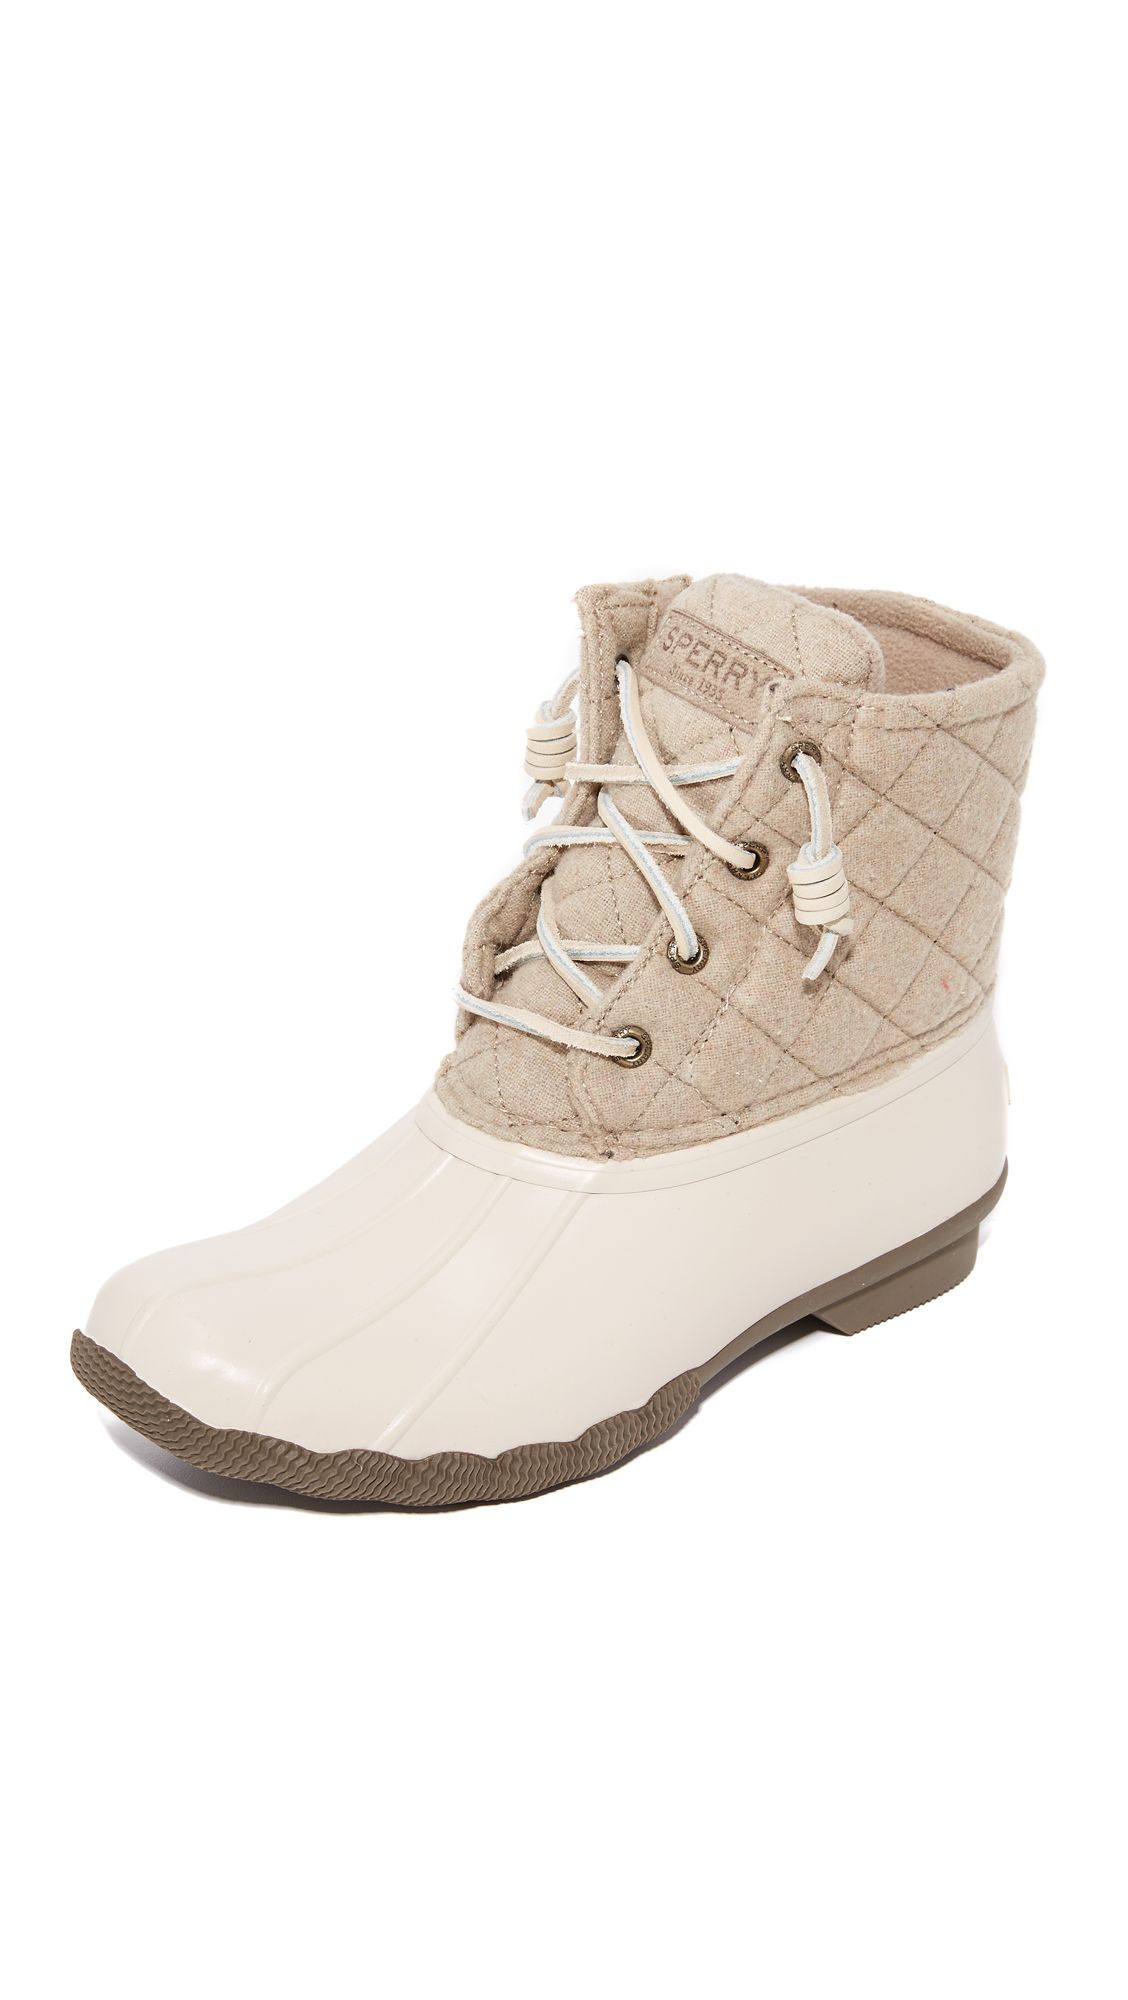 Sperry Saltwater Quilted Wool Booties - Oyster/Oatmeal | Shopbop